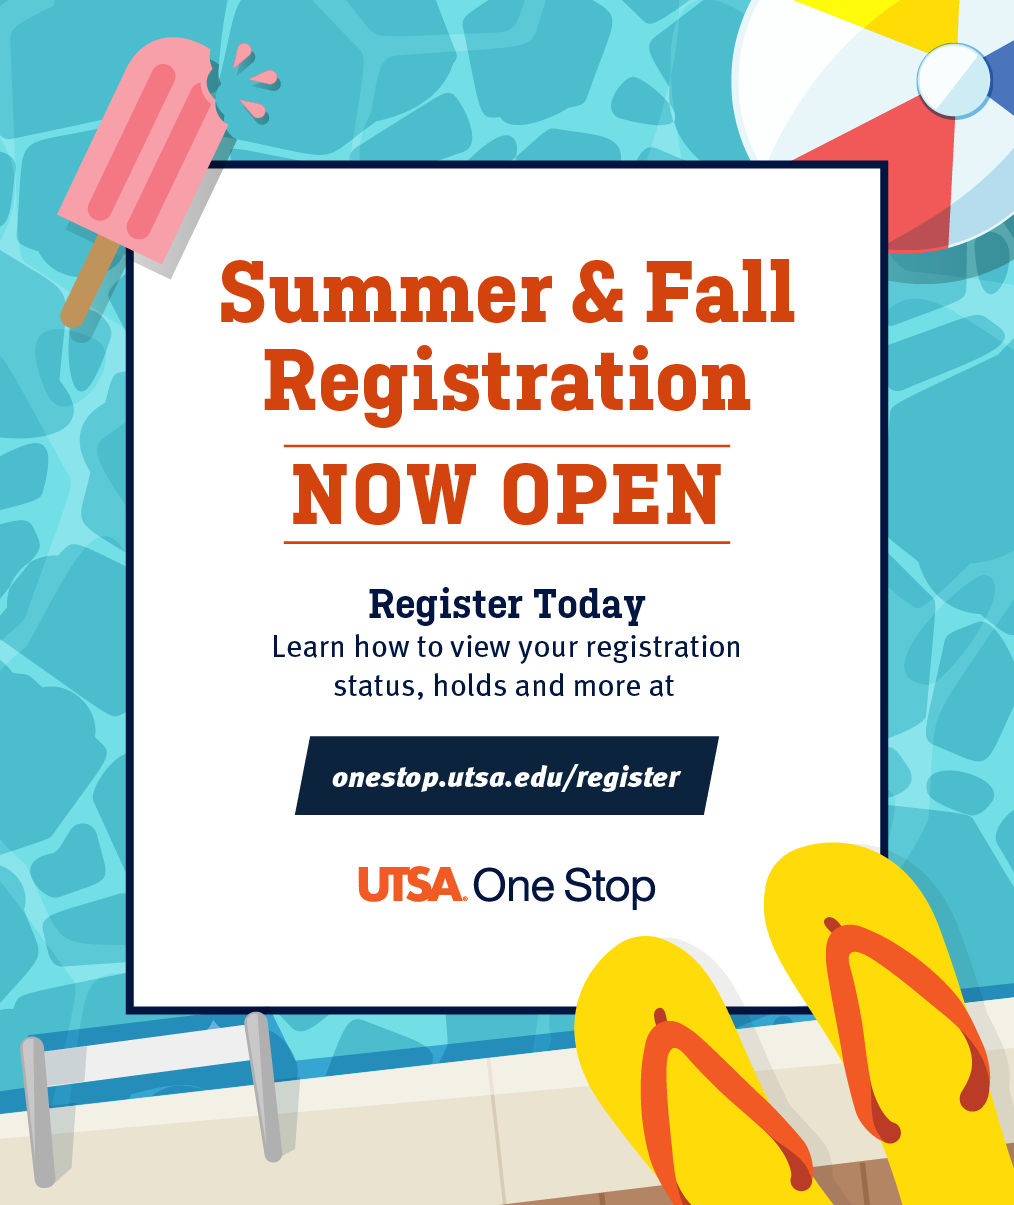 Summer and Fall Registration Now Open. Register Today, learn how to view your registration status, holds and more at onestop.utsa.edu/register.